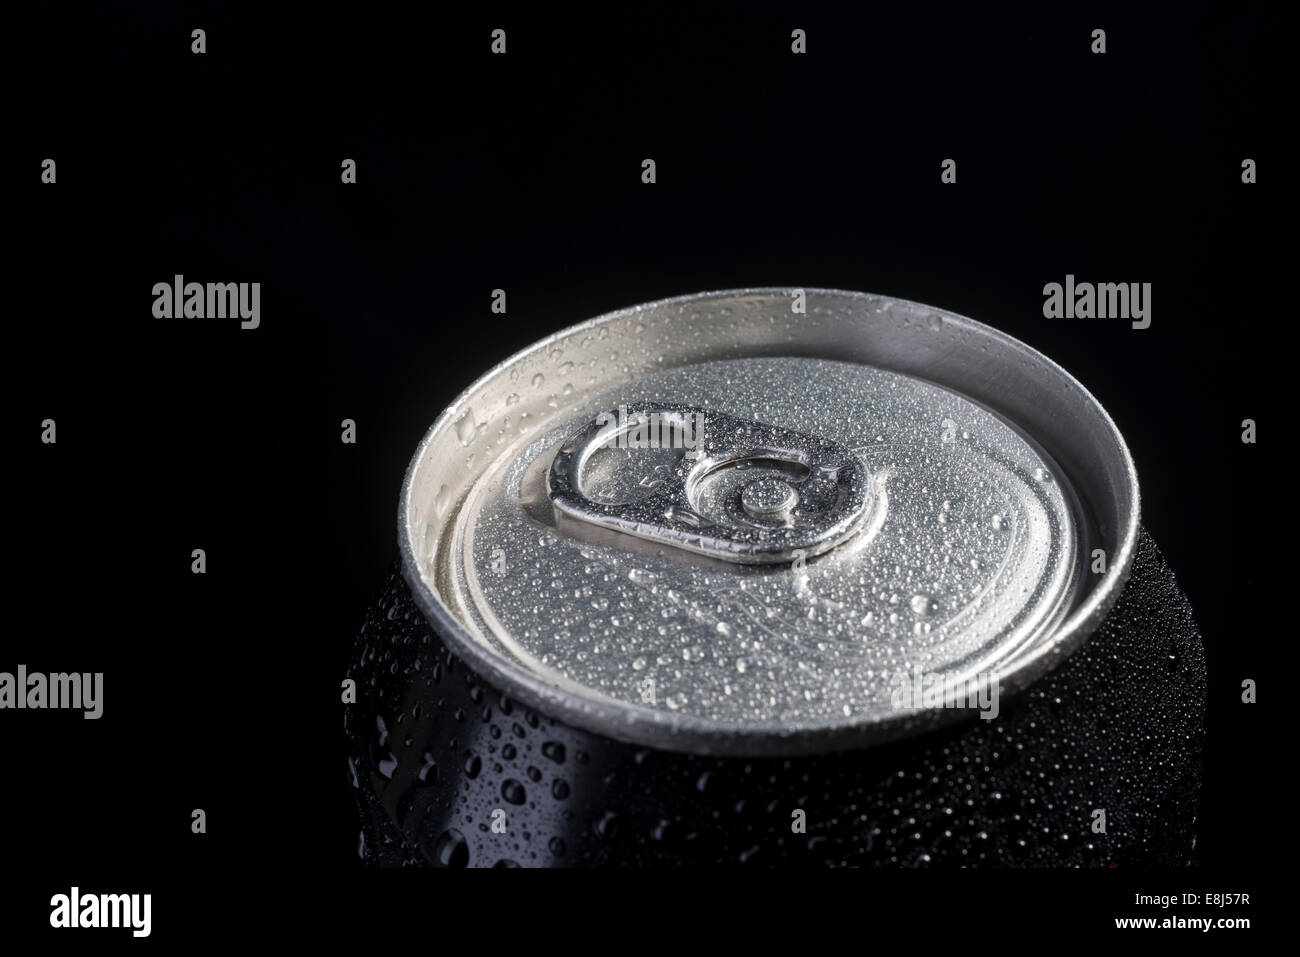 Drinks can with water condensation Stock Photo